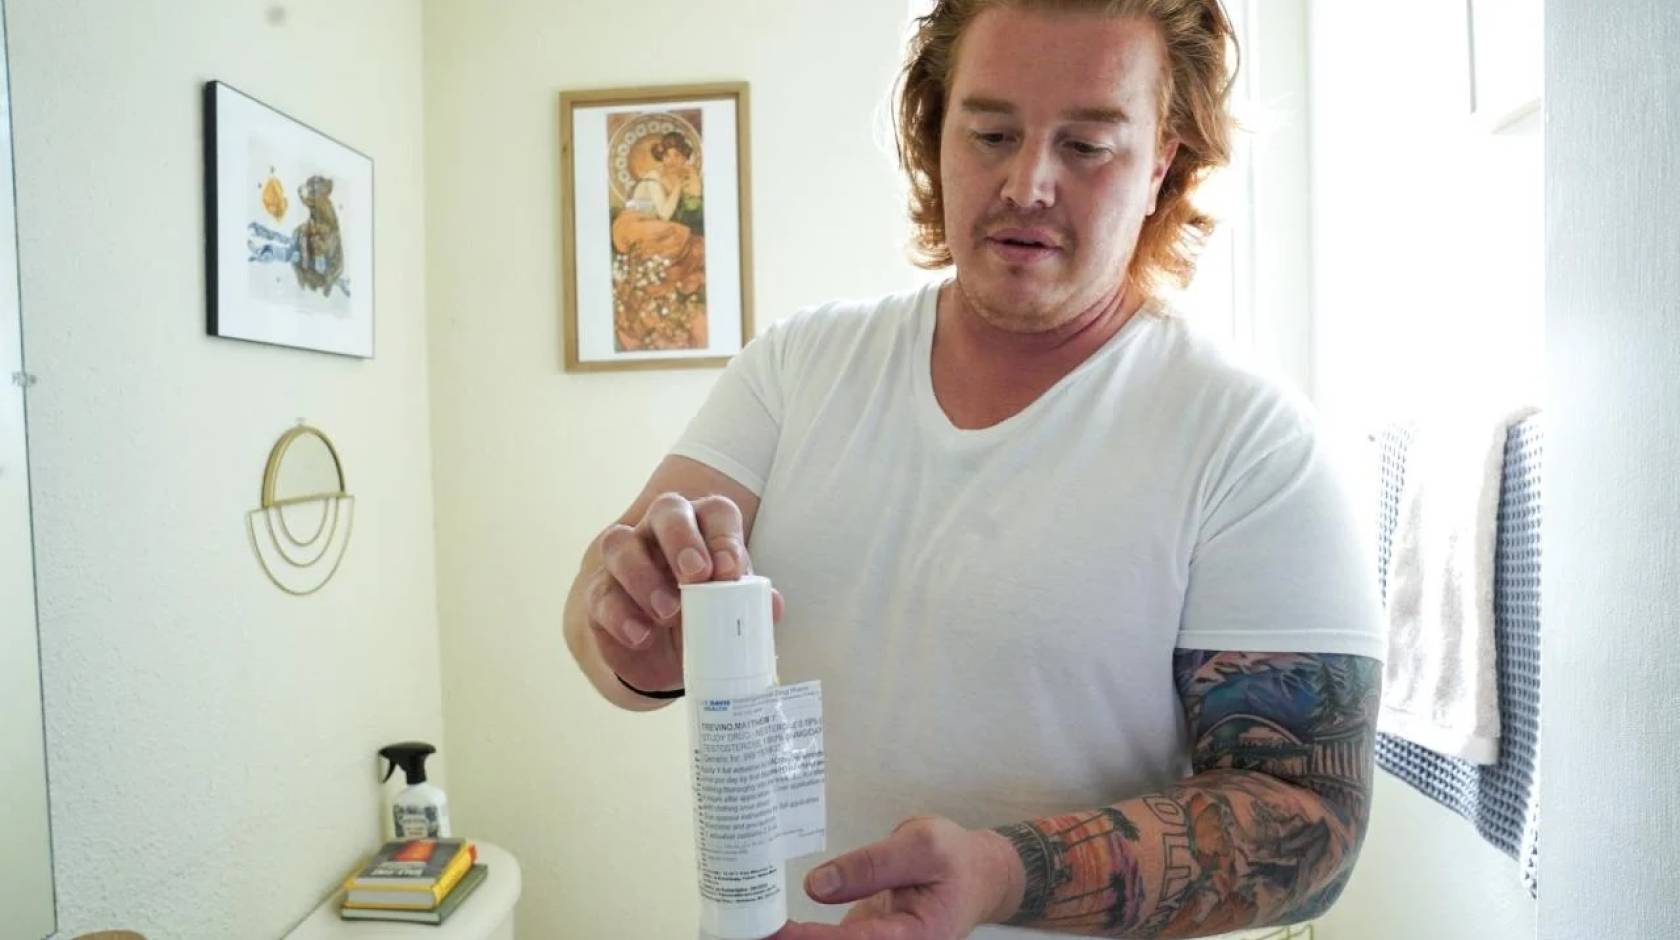 A man with arm tattoos in a white t-shirt holds a white plastic bottle, standing in a well lit room with white walls.